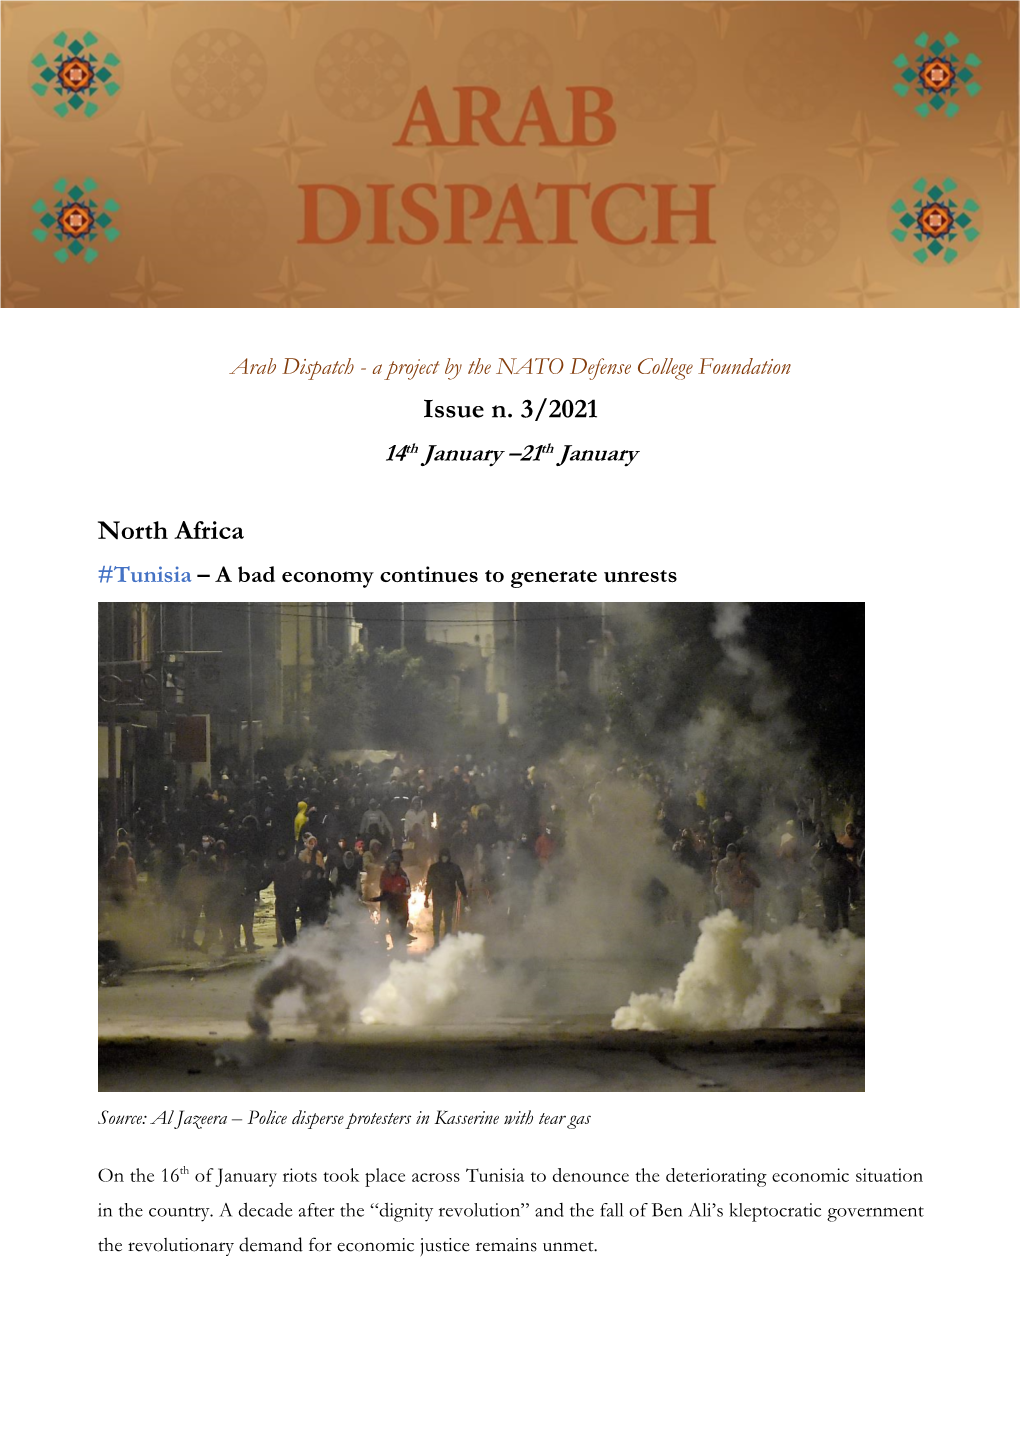 Arab Dispatch - a Project by the NATO Defense College Foundation Issue N